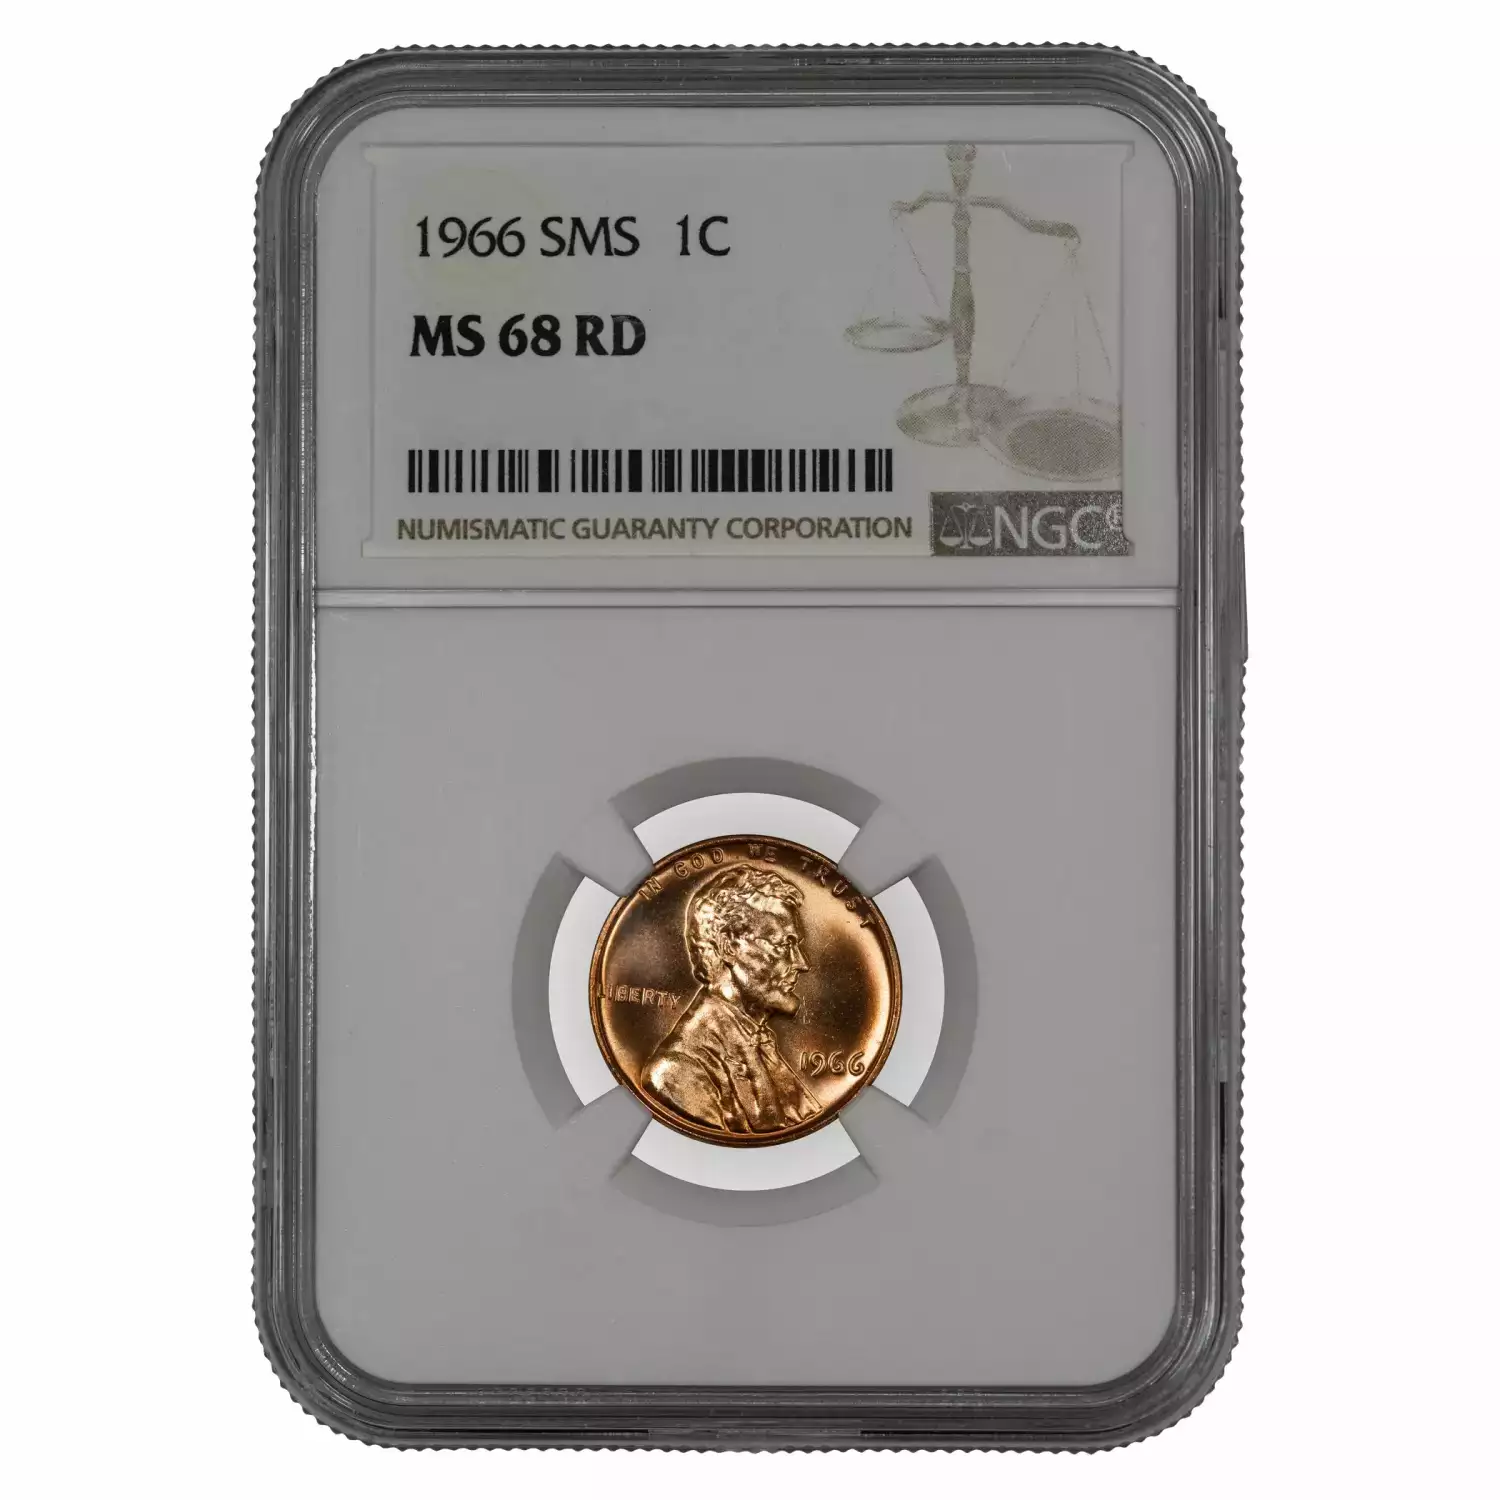 1966 SMS LINCOLN MEMORIAL CENT PENNY 1C NGC CERTIFIED MS 68 RD